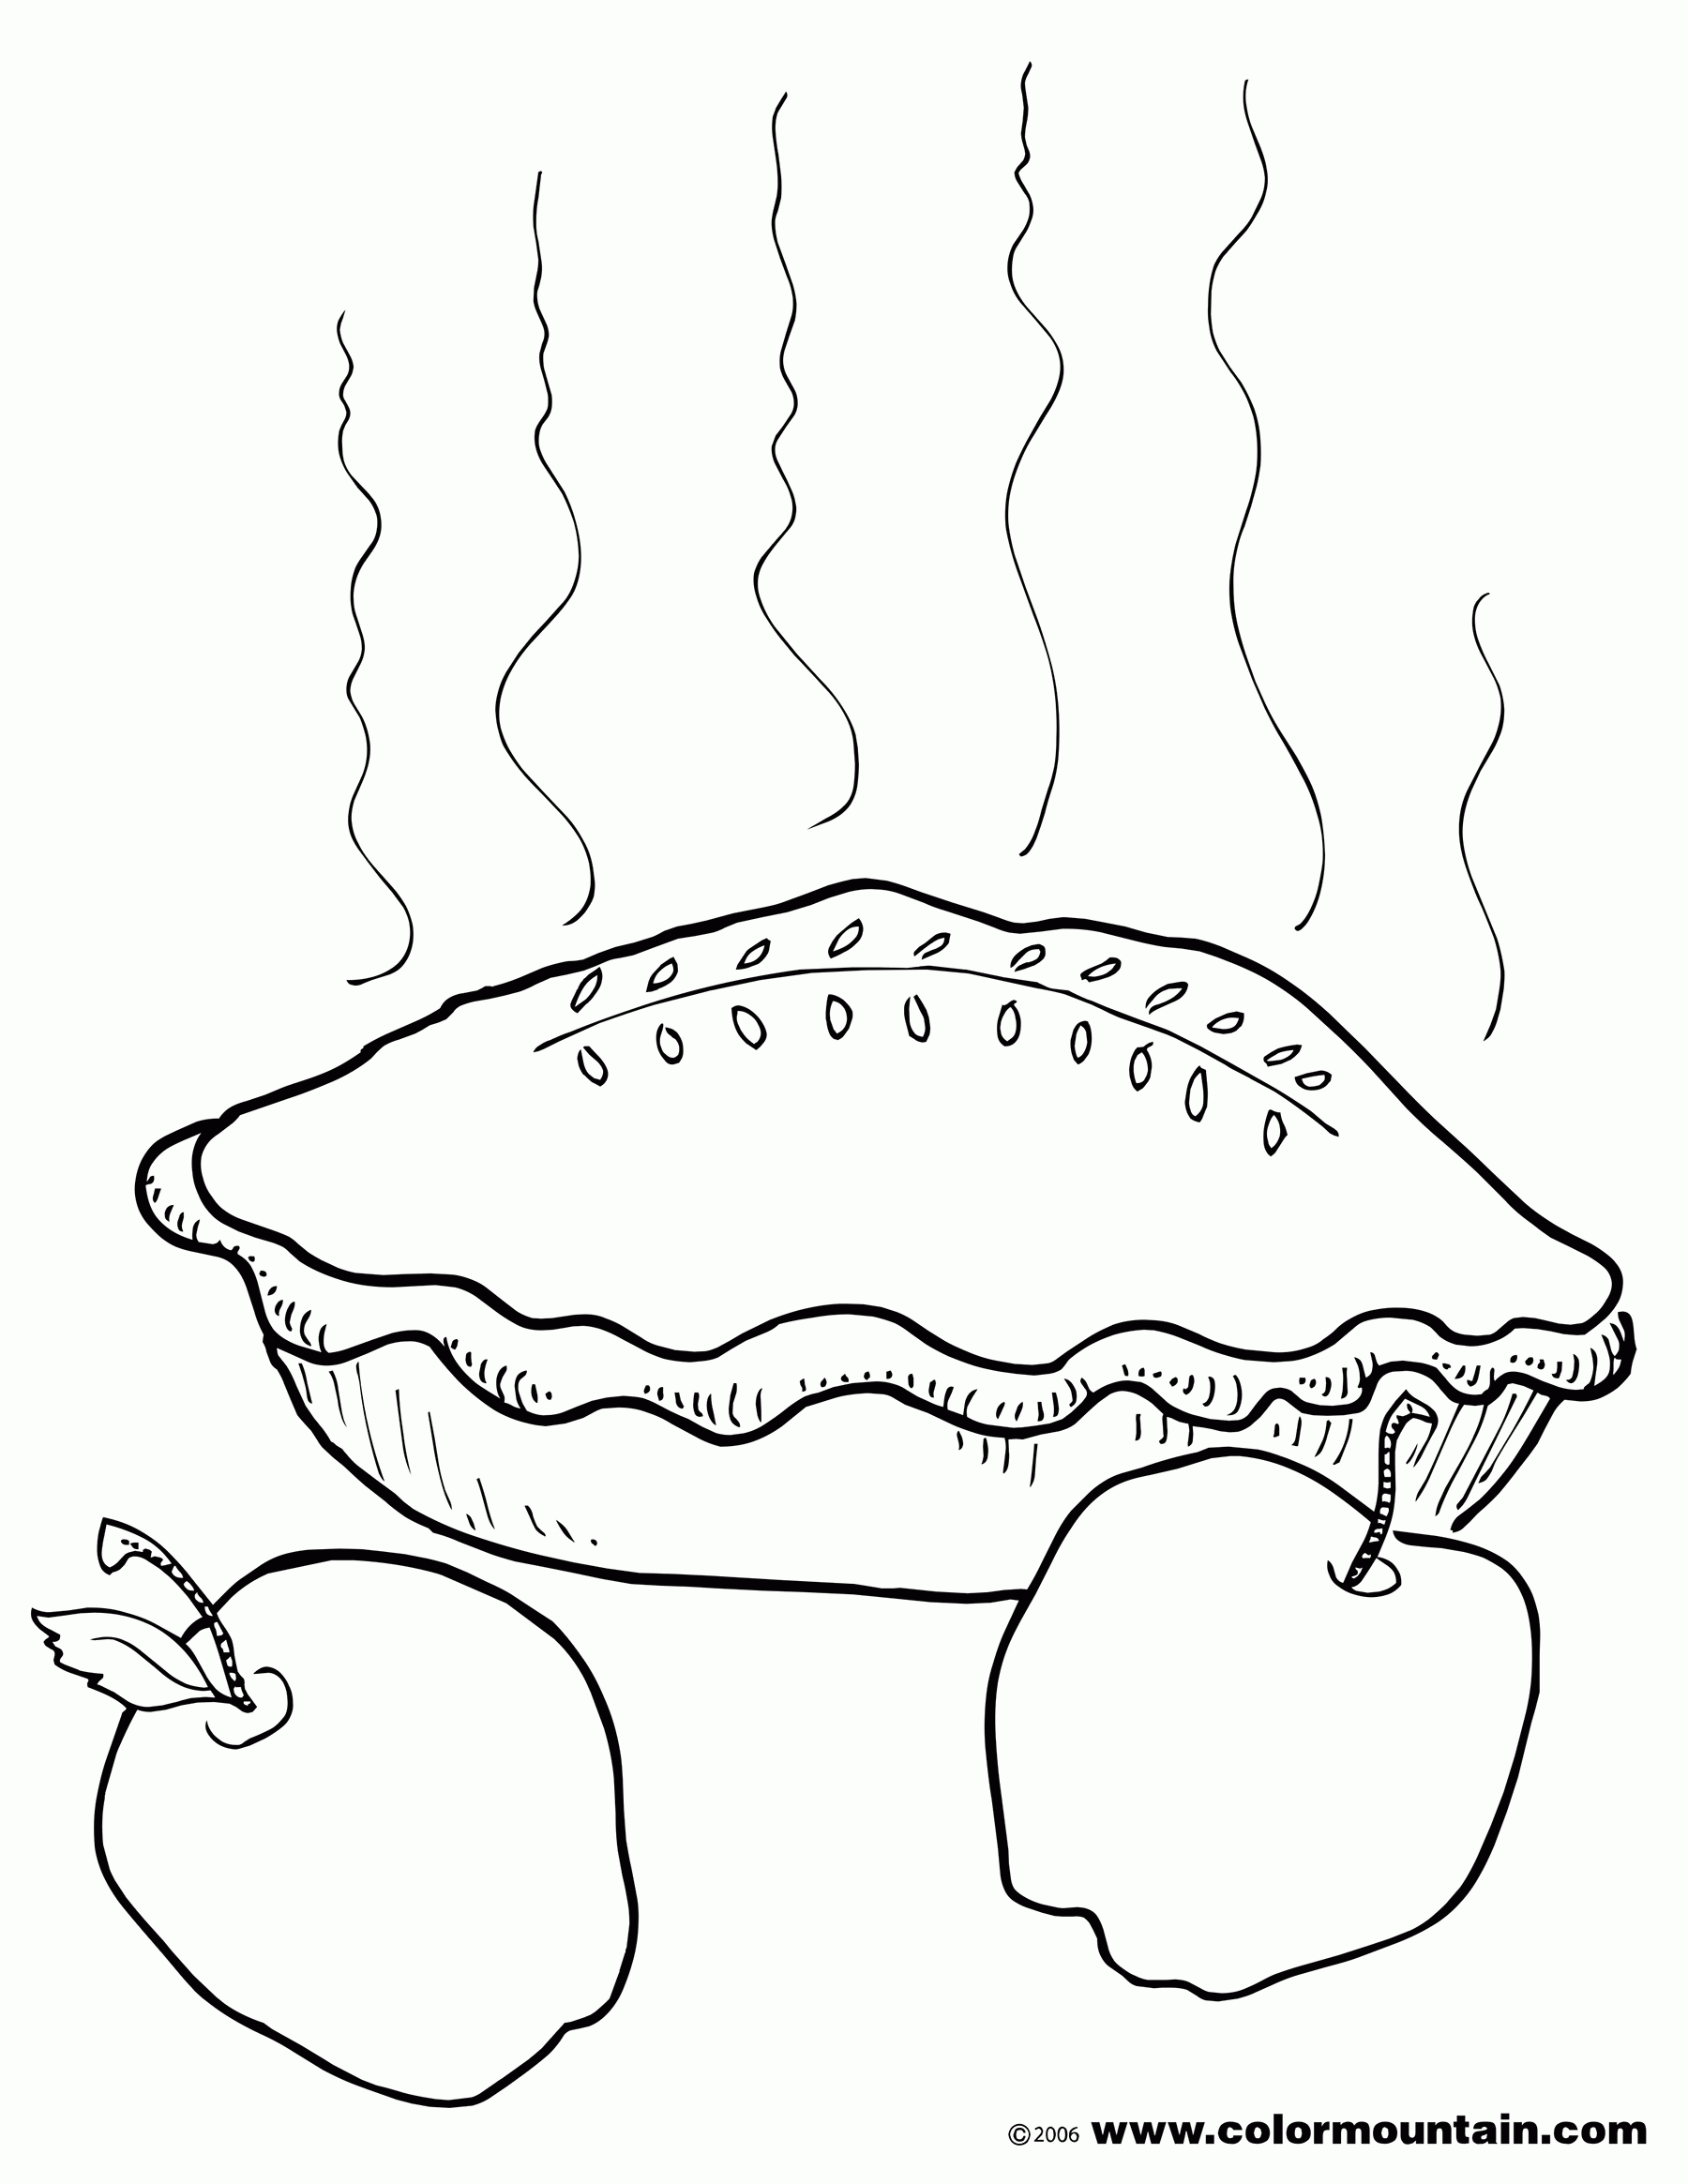 Download Apple Pie Coloring Page - Coloring Home